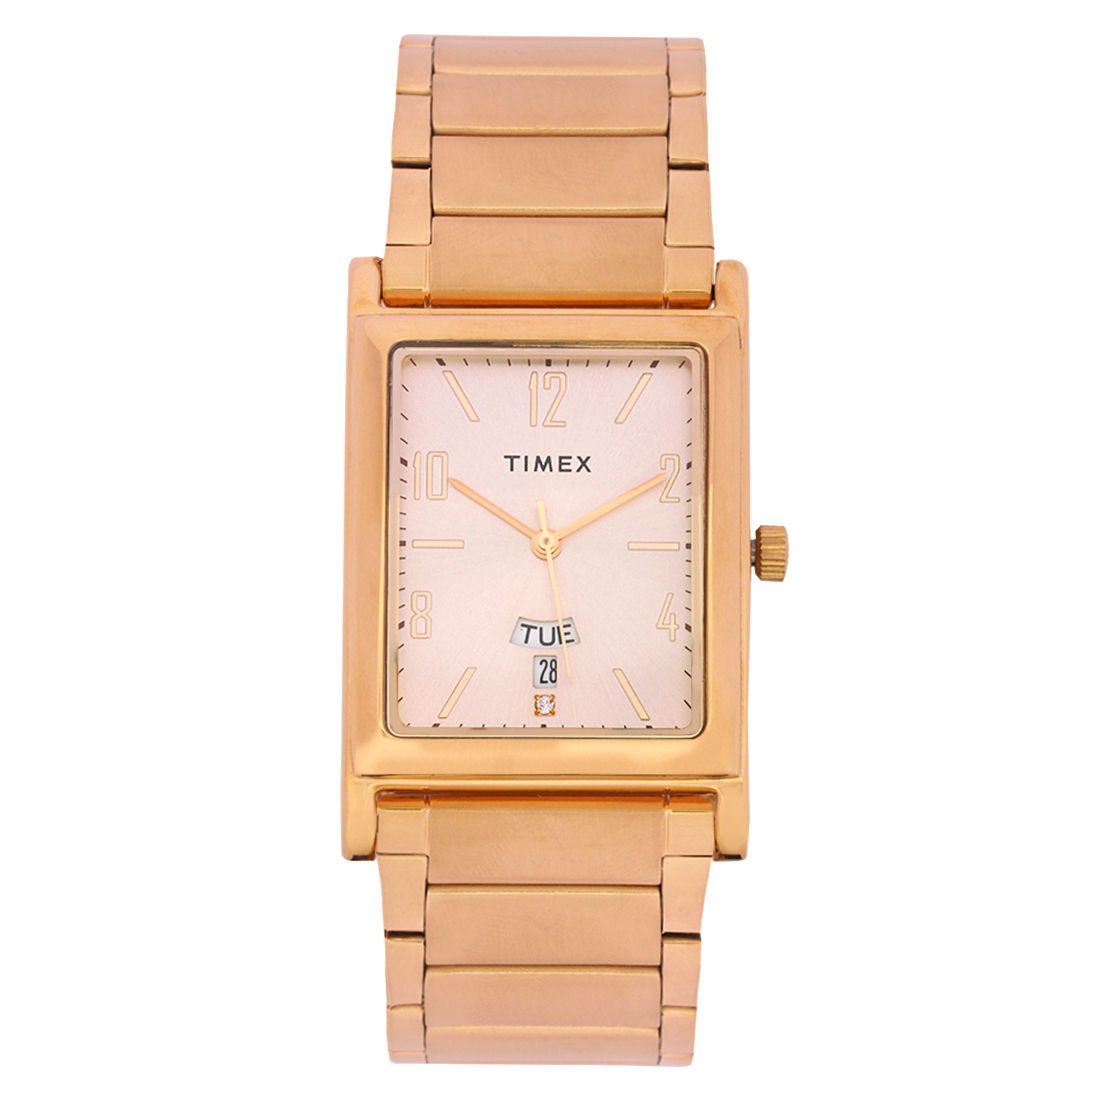 Timex Analog Champagne Dial Men's Watch (TW000L518)